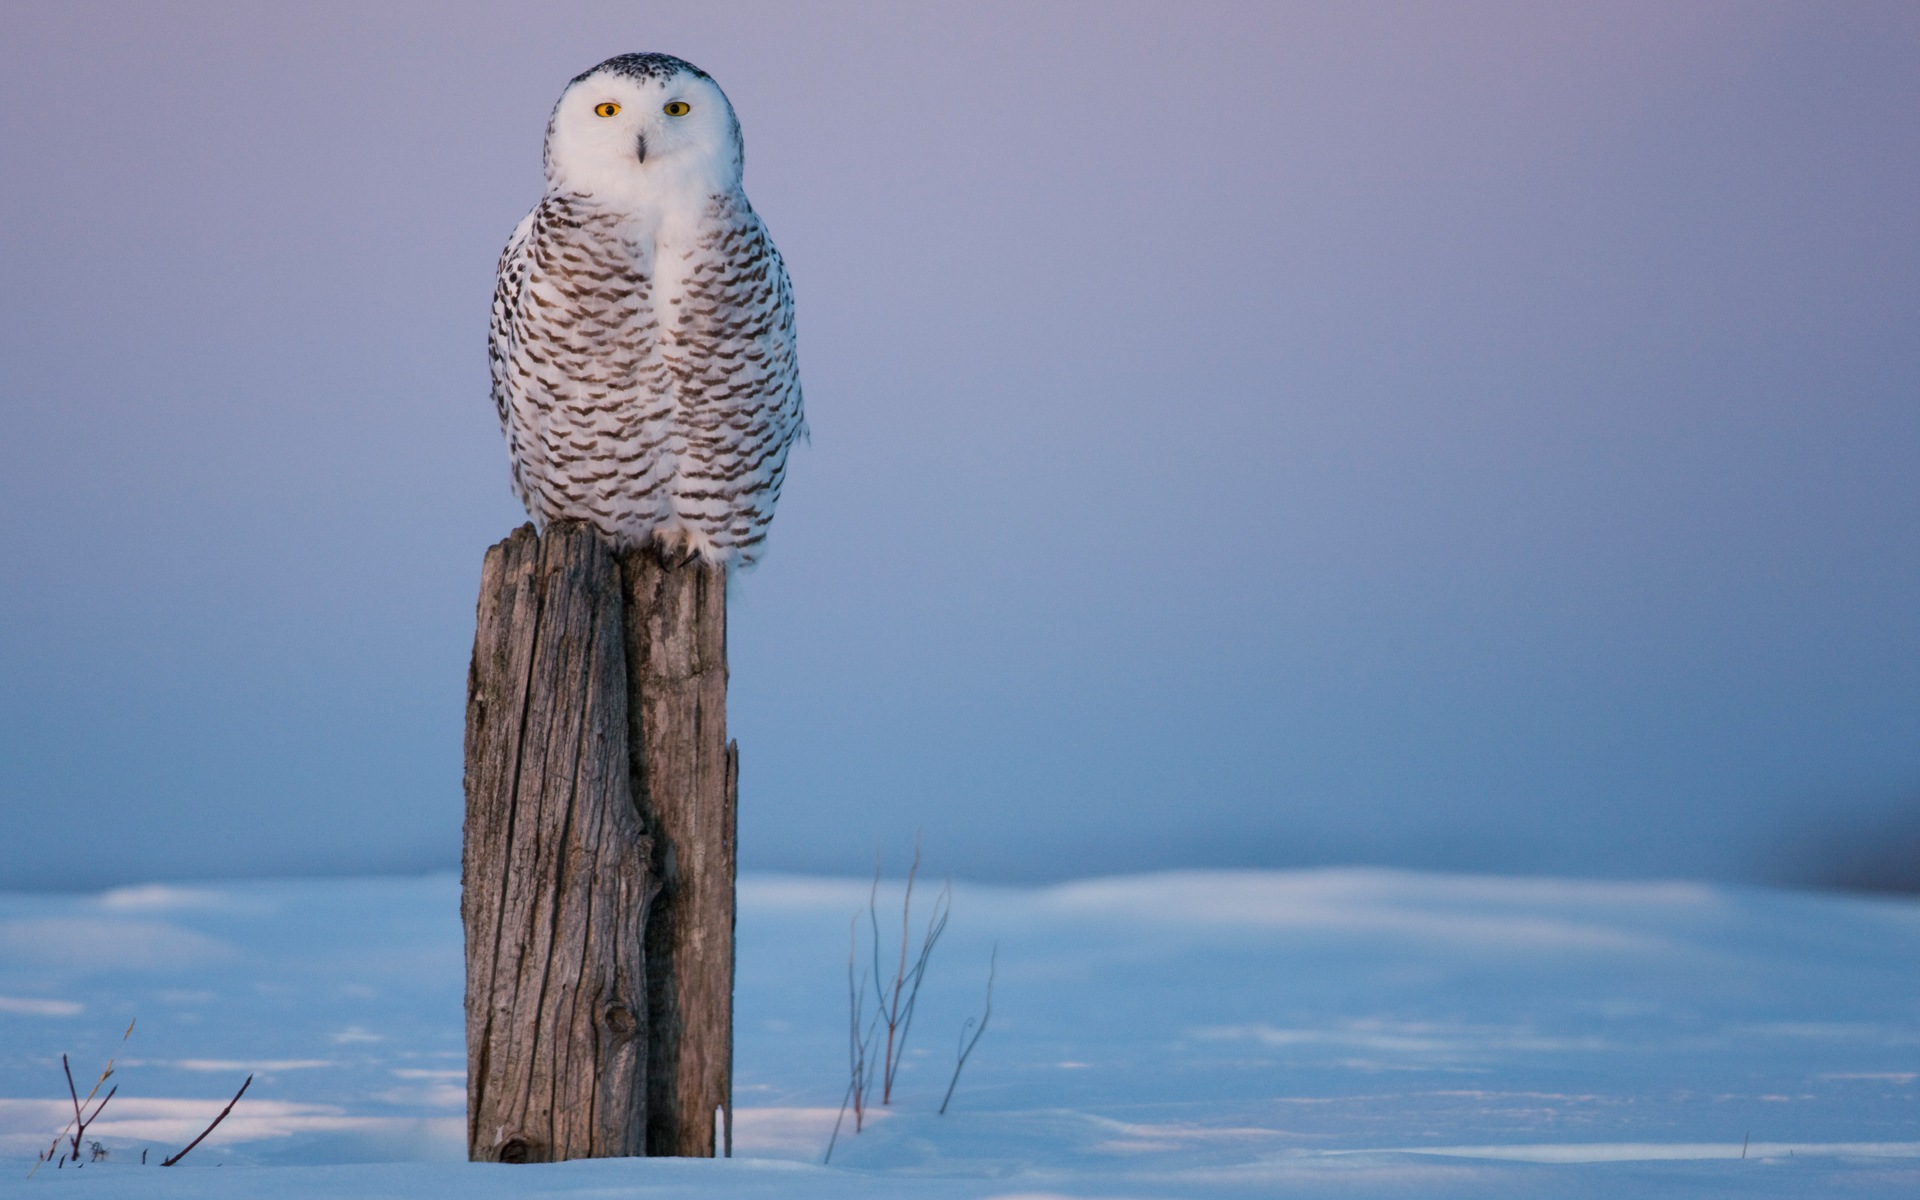 Windows 8 Wallpapers: Arctic, the nature ecological landscape, arctic animals #2 - 1920x1200